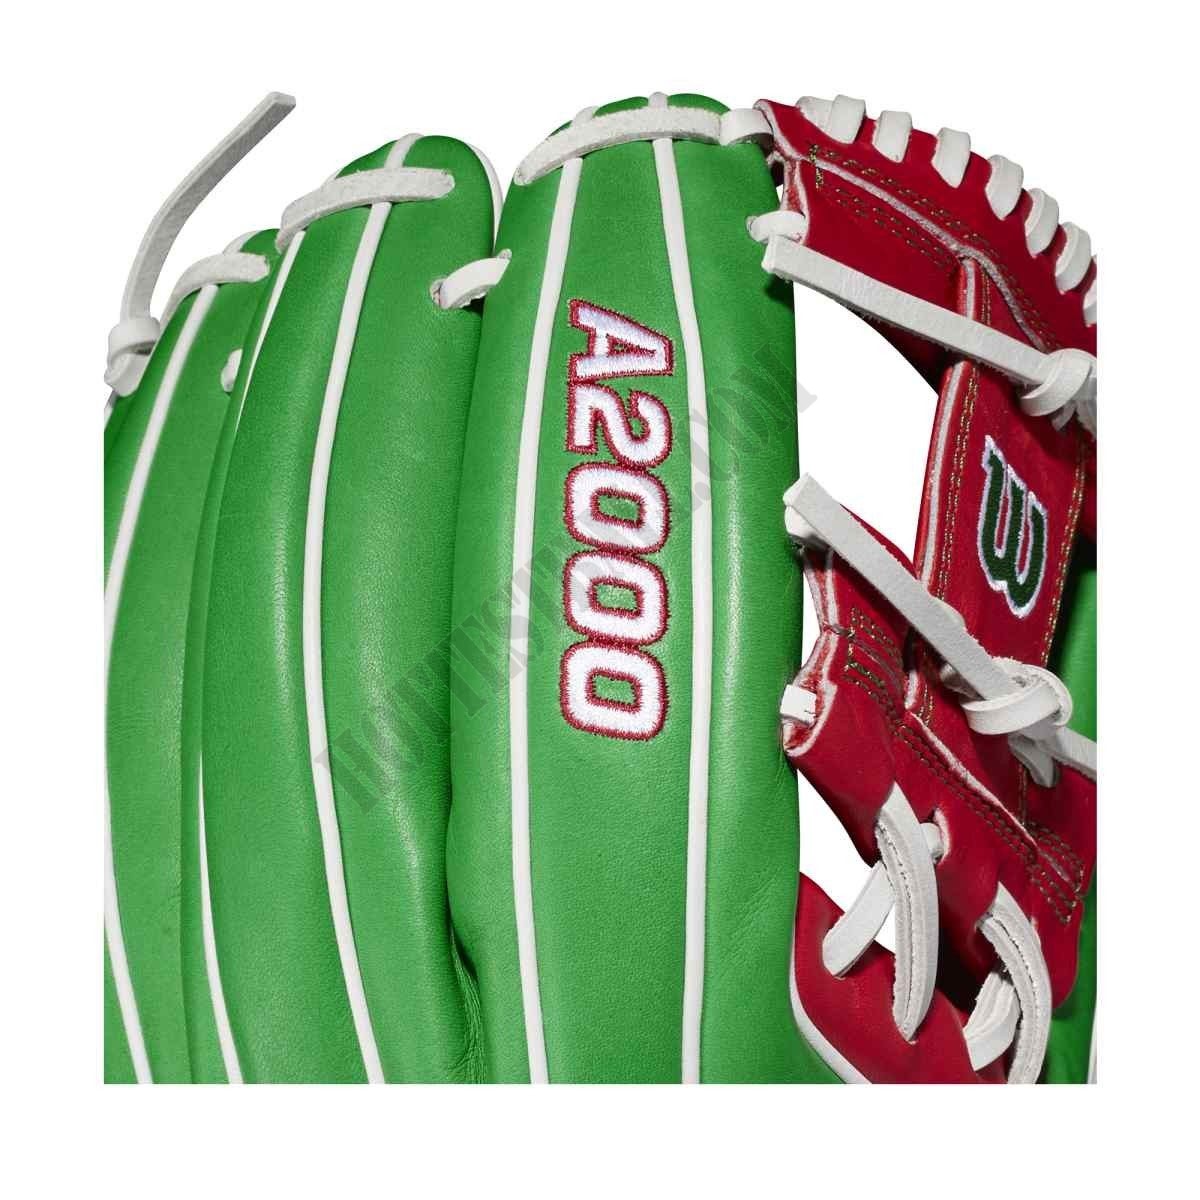 2021 A2000 1786 Mexico 11.5" Infield Baseball Glove - Limited Edition ● Wilson Promotions - -6